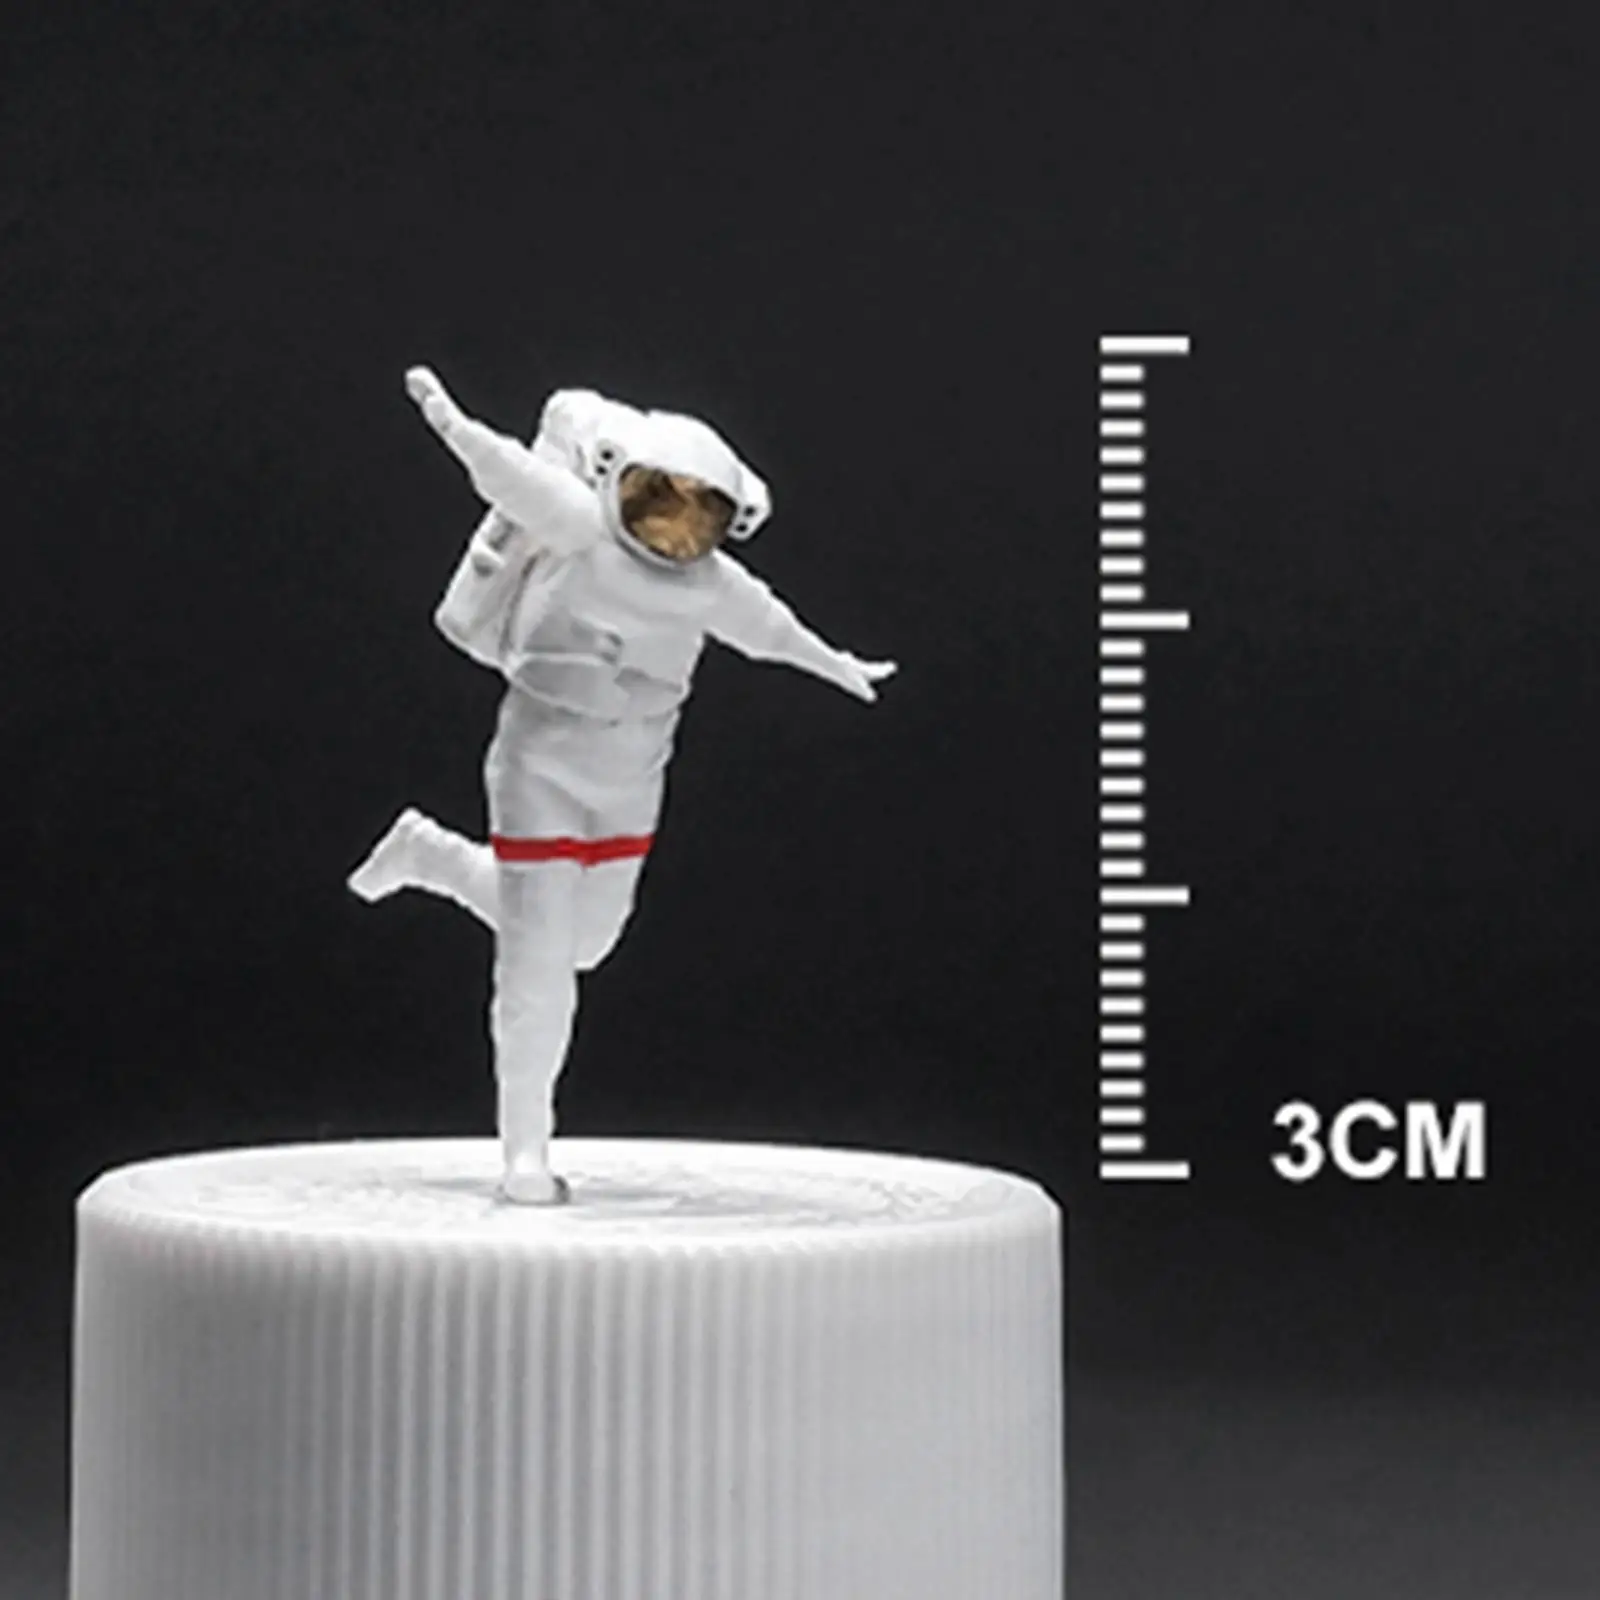 1/64 Figure Spaceman Astronaut Micro Landscape DIY Projects Tiny People Miniature Scenes Layout Accessories S Scale Dioramas